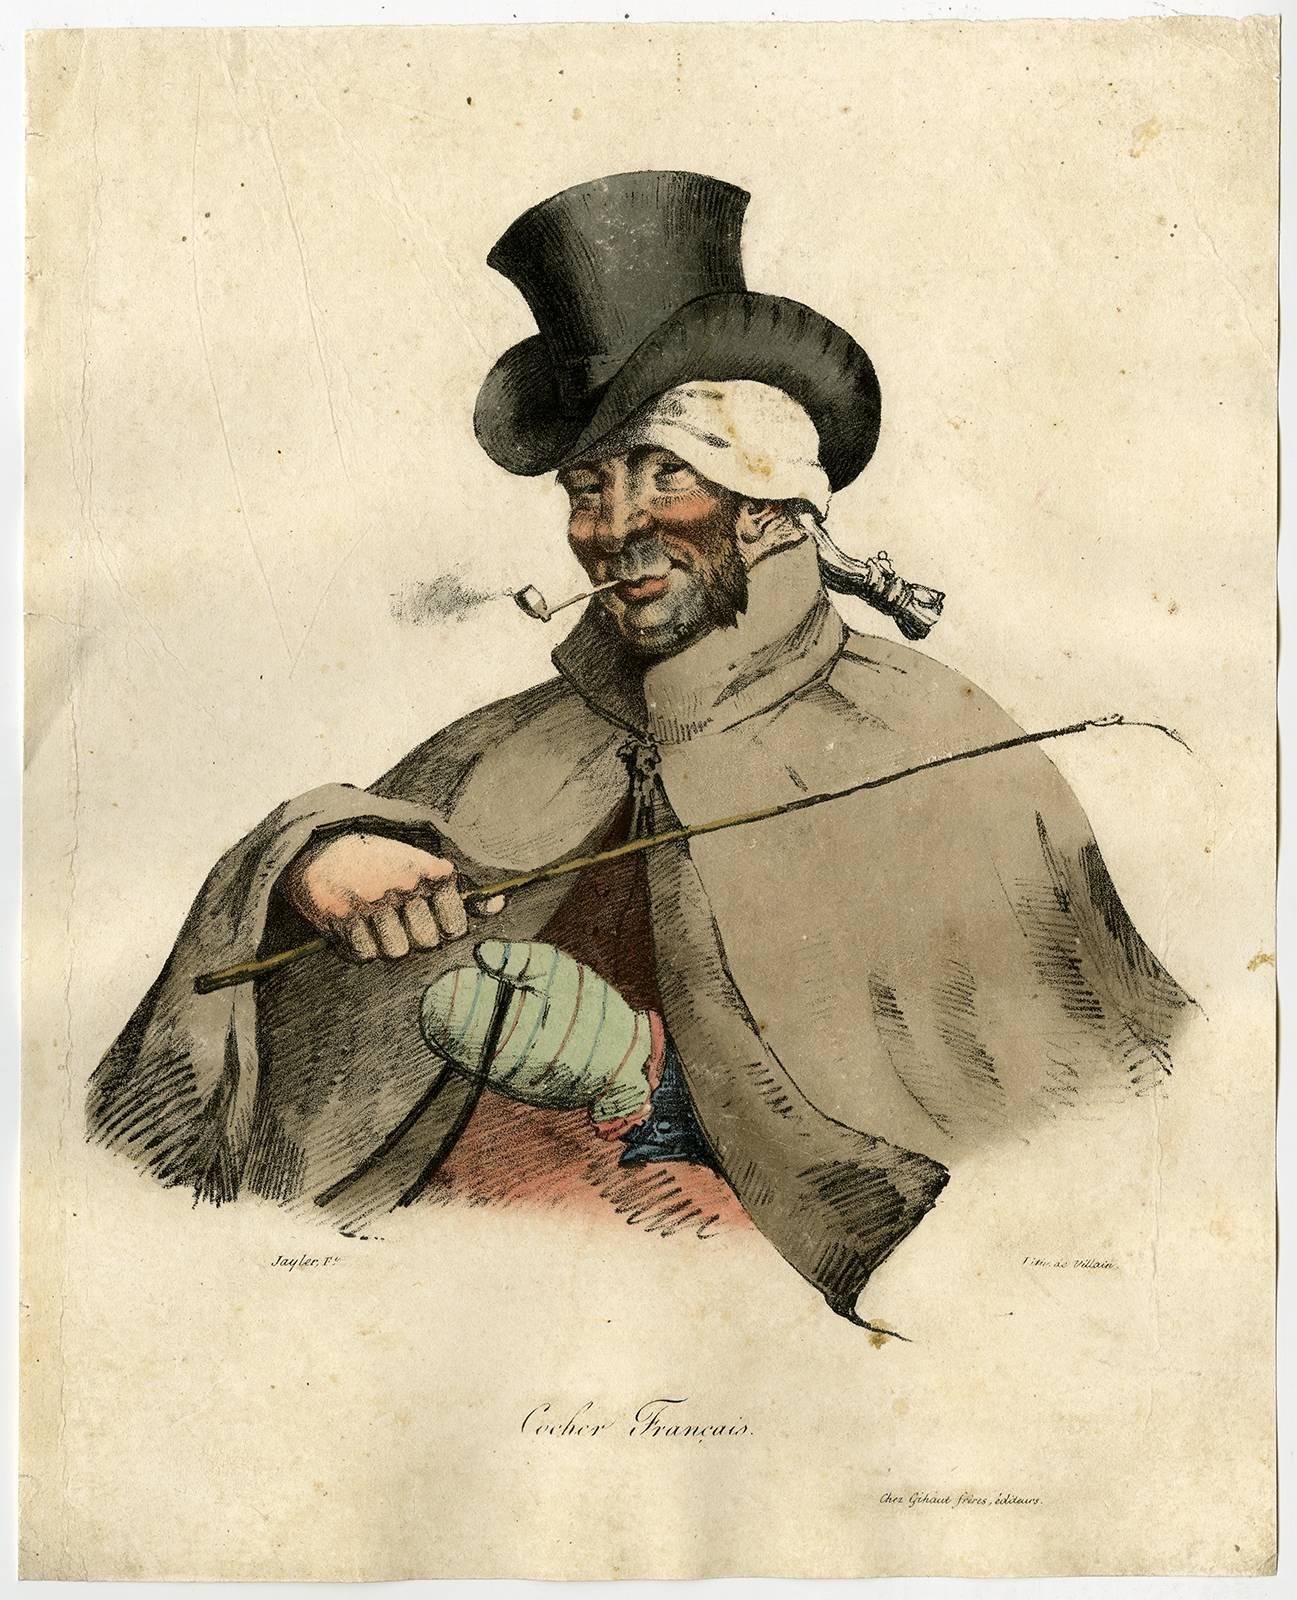 Unknown Figurative Print - Cocher Anglais - Cocher Francais - A French and an English Coachman.